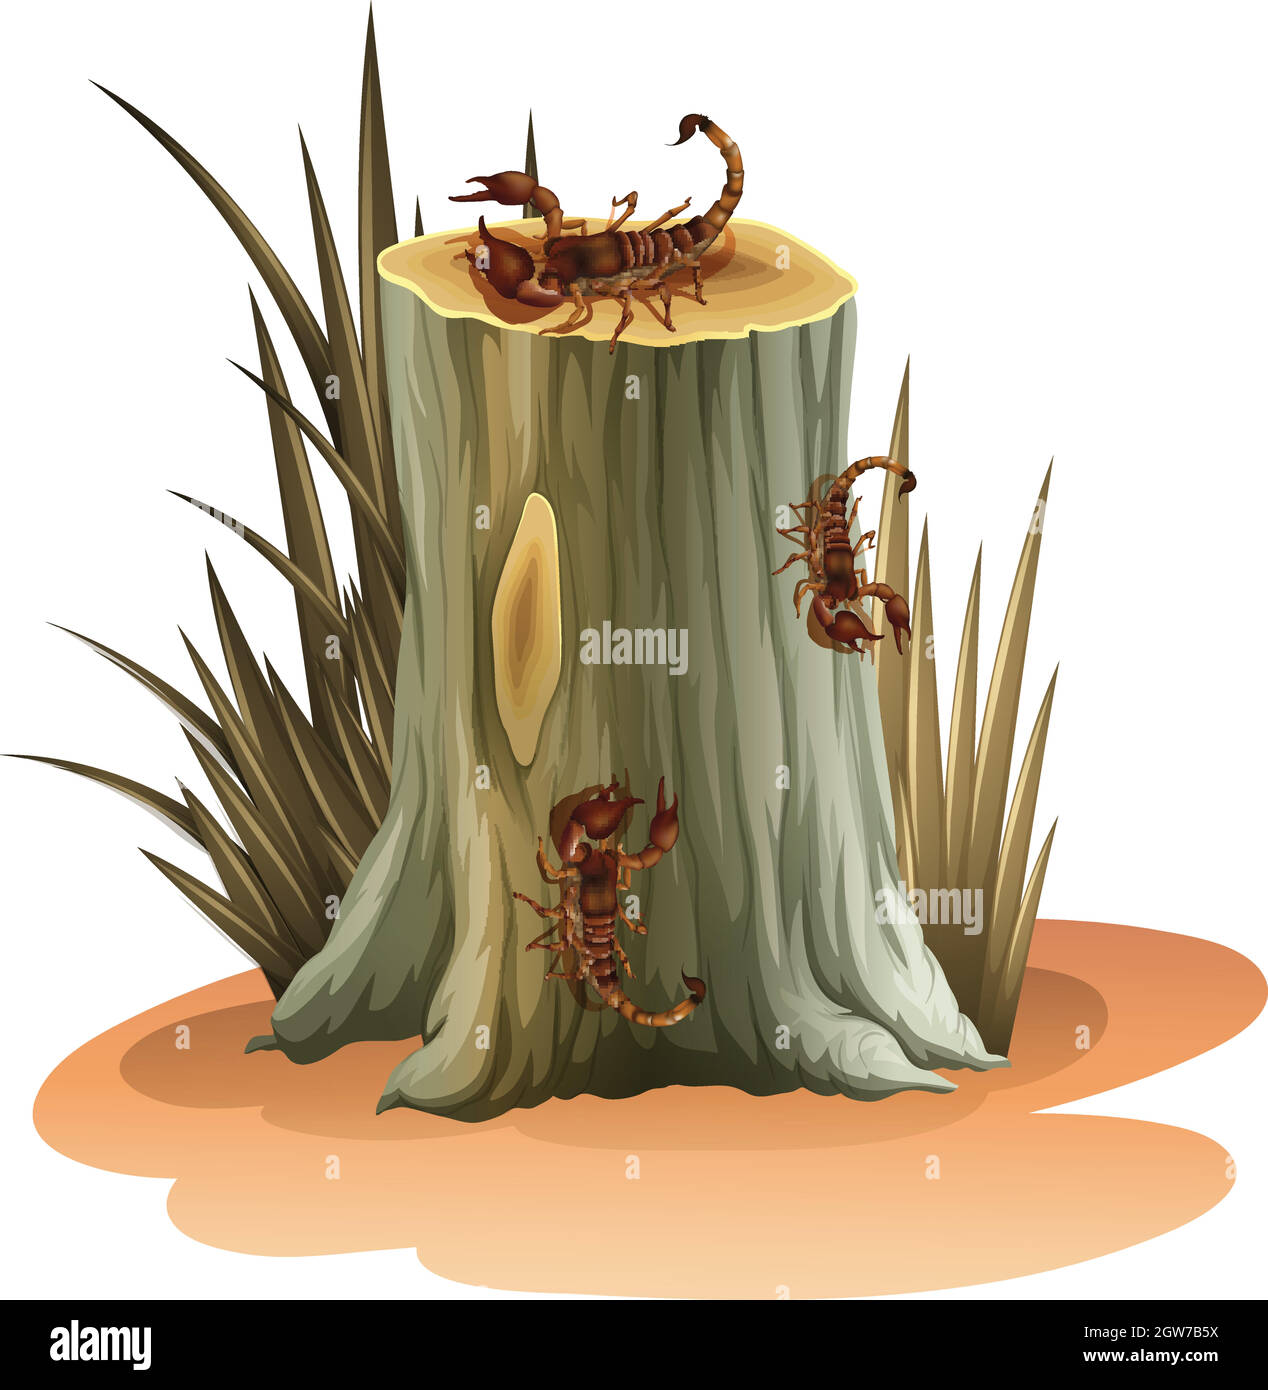 A stump with scorpions Stock Vector